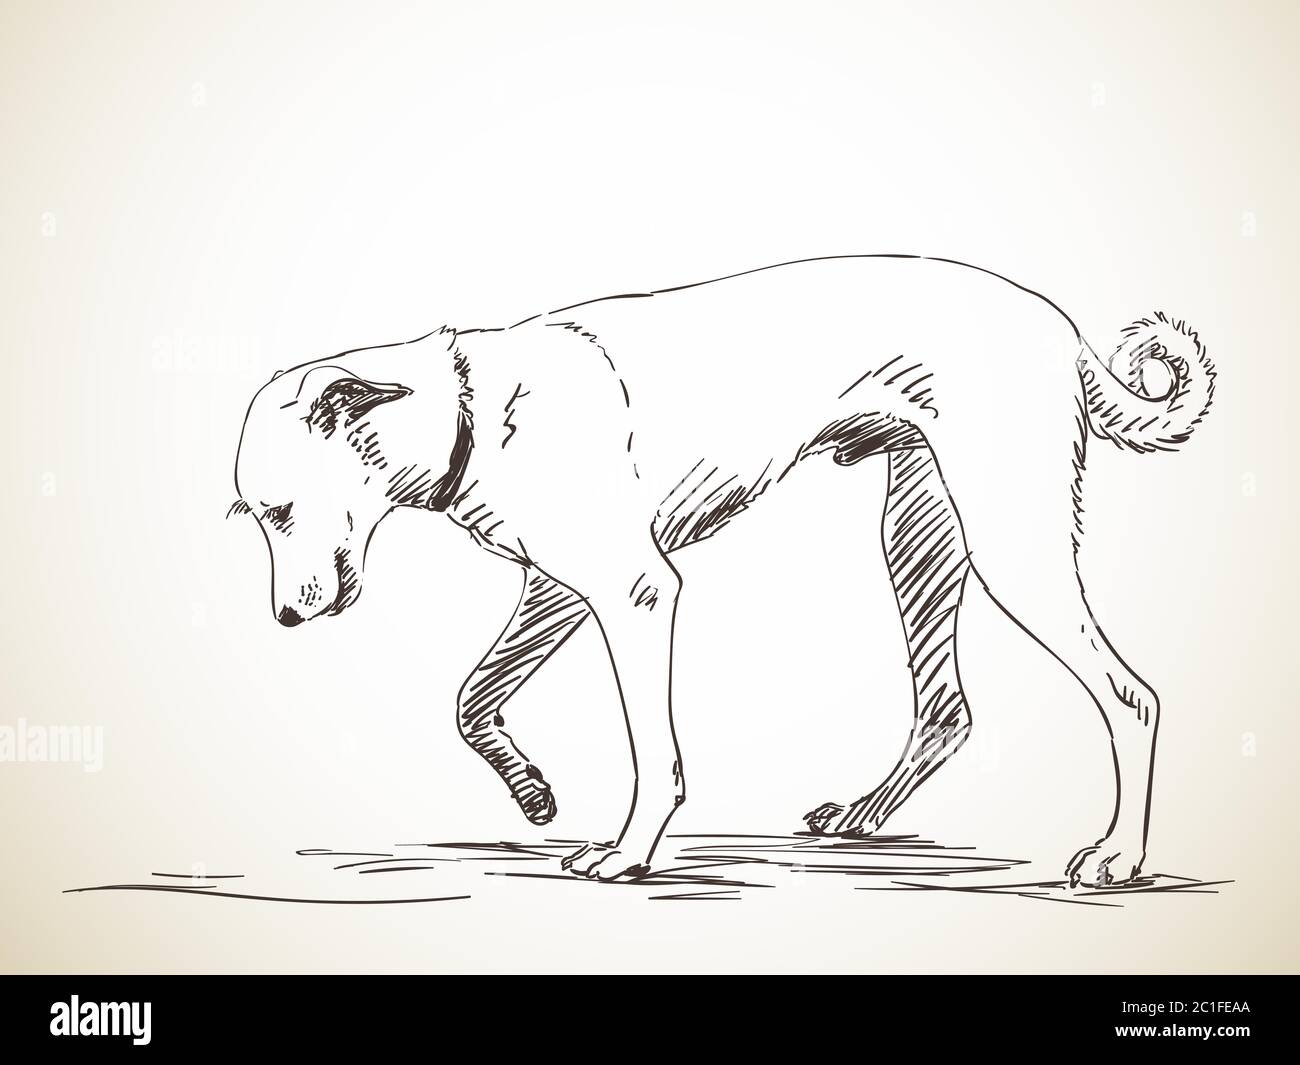 Sketch of dog. Hand drawn illustration. Isolated Stock Vector ...